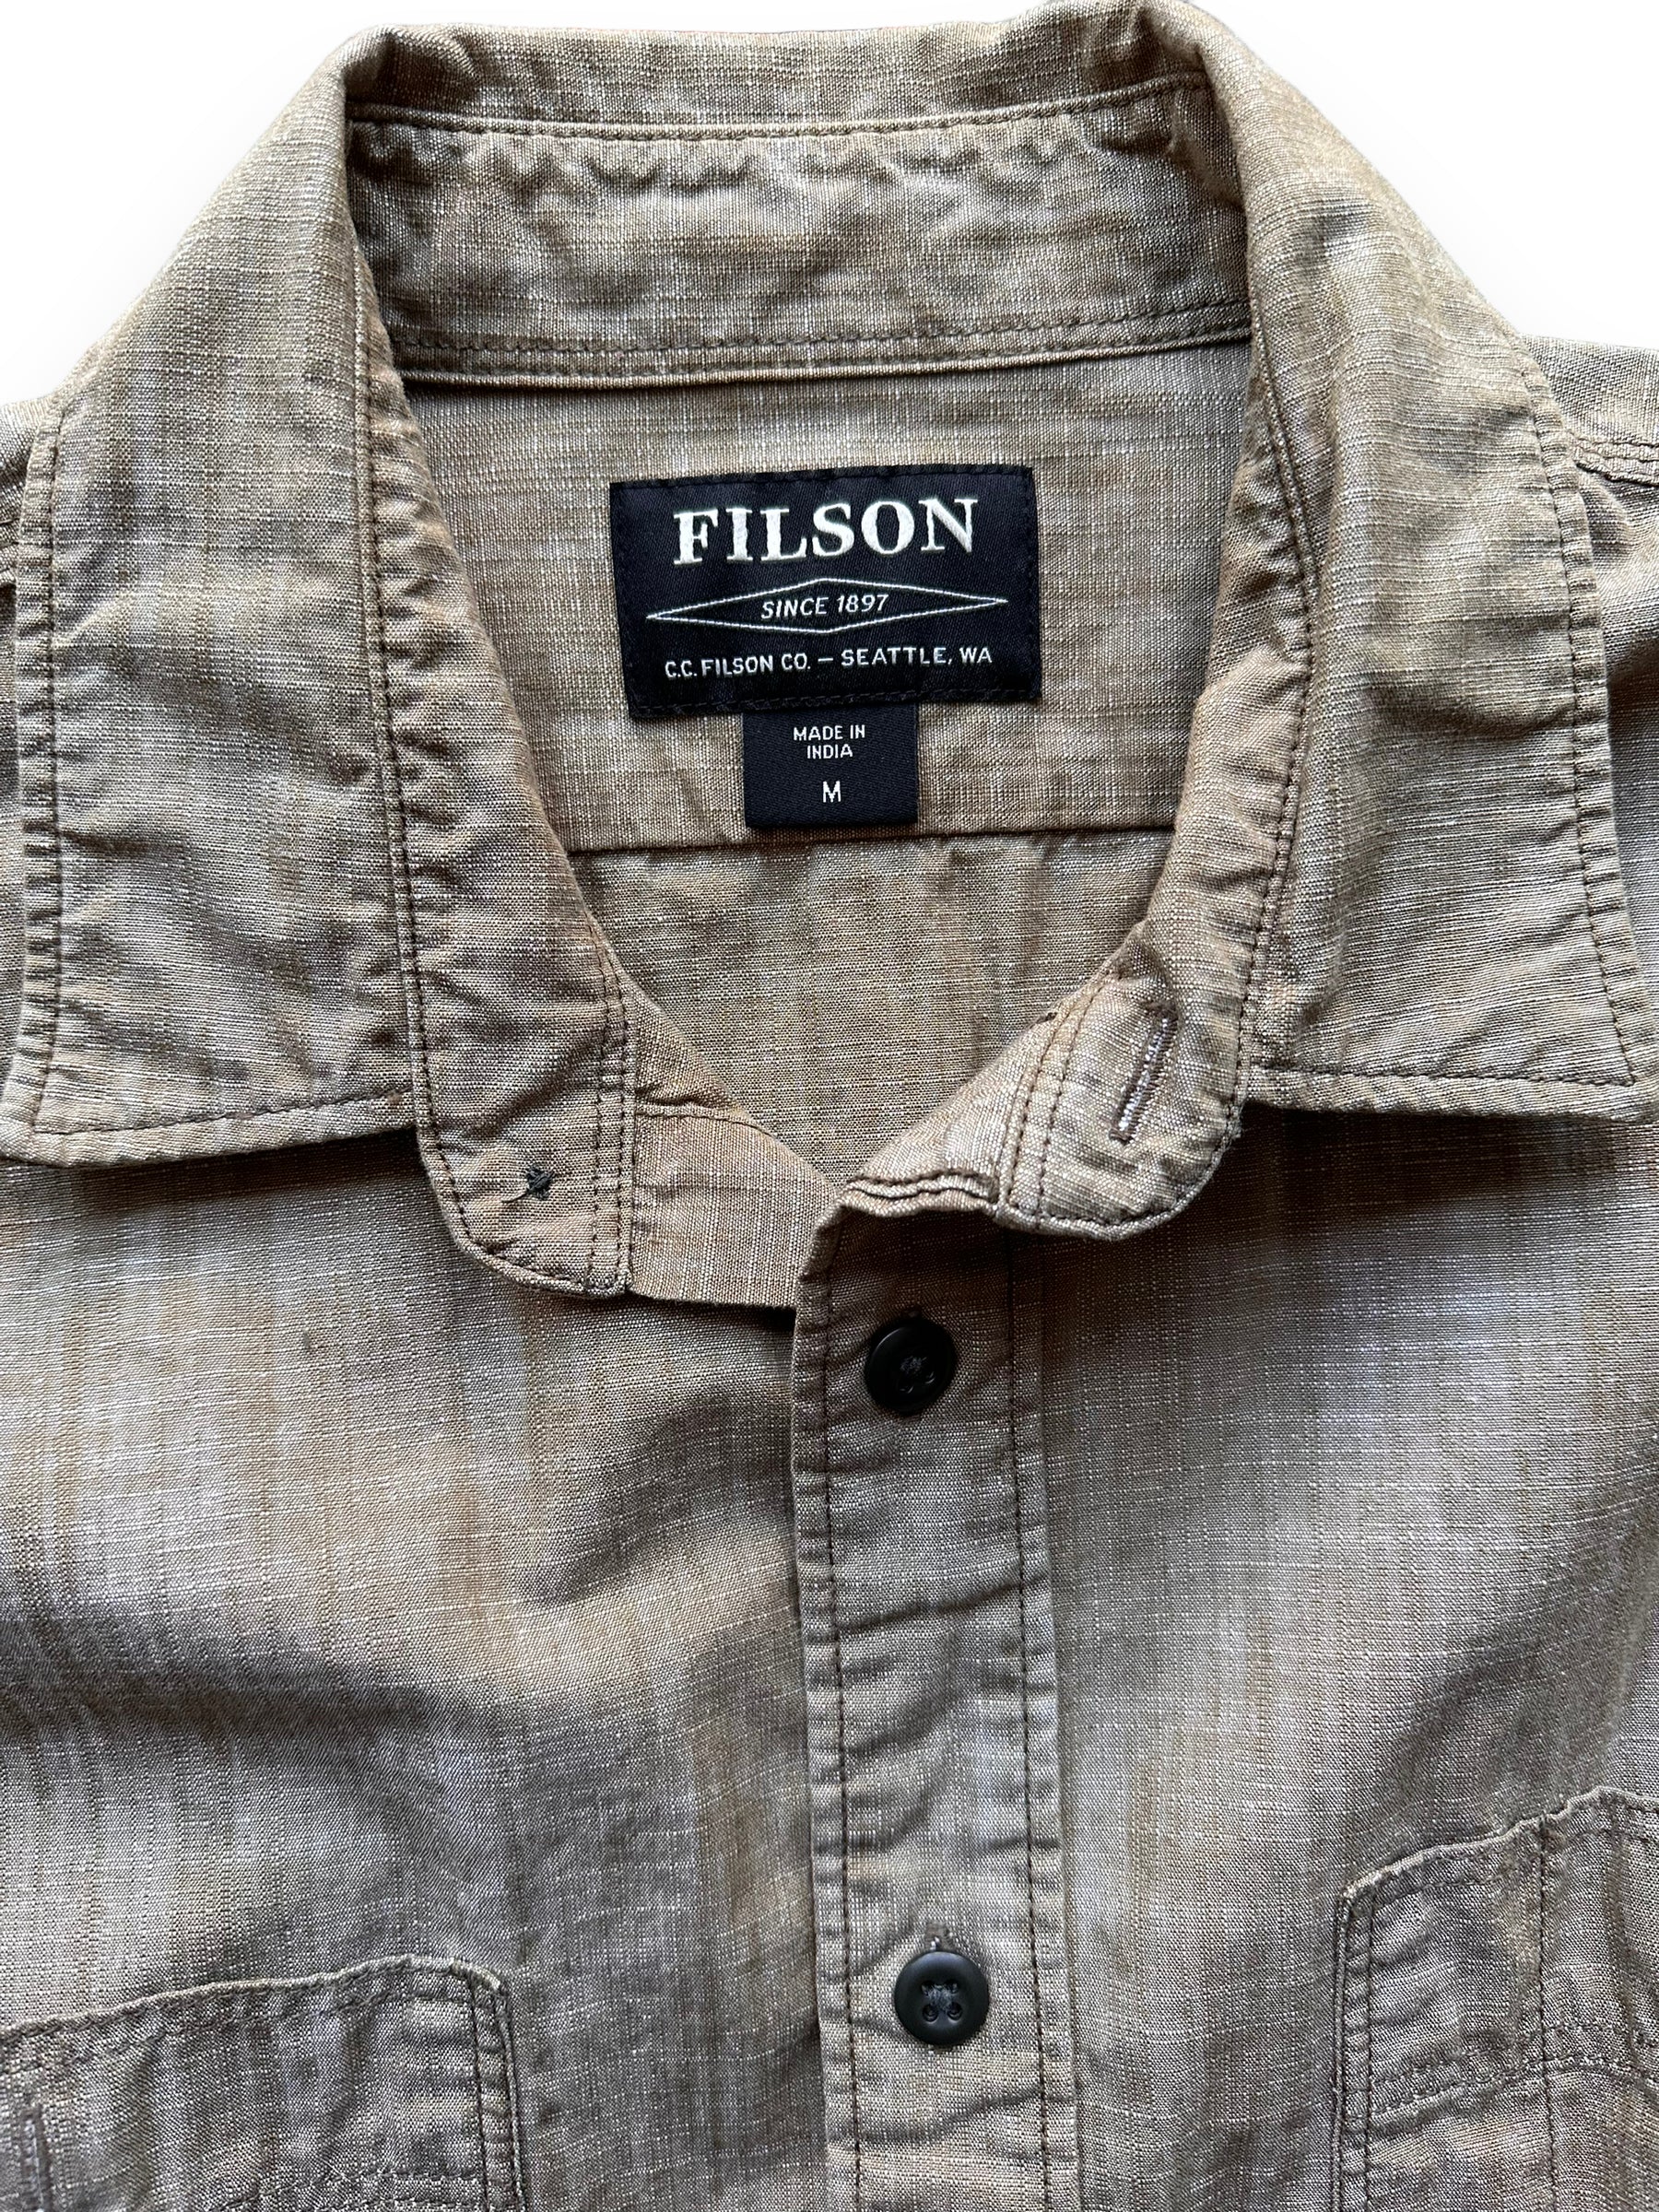 Collar/Tag View of Filson Brown Chambray CPO Shirt SZ M |  Barn Owl Vintage Goods | Filson Bargain Outlet Seattle